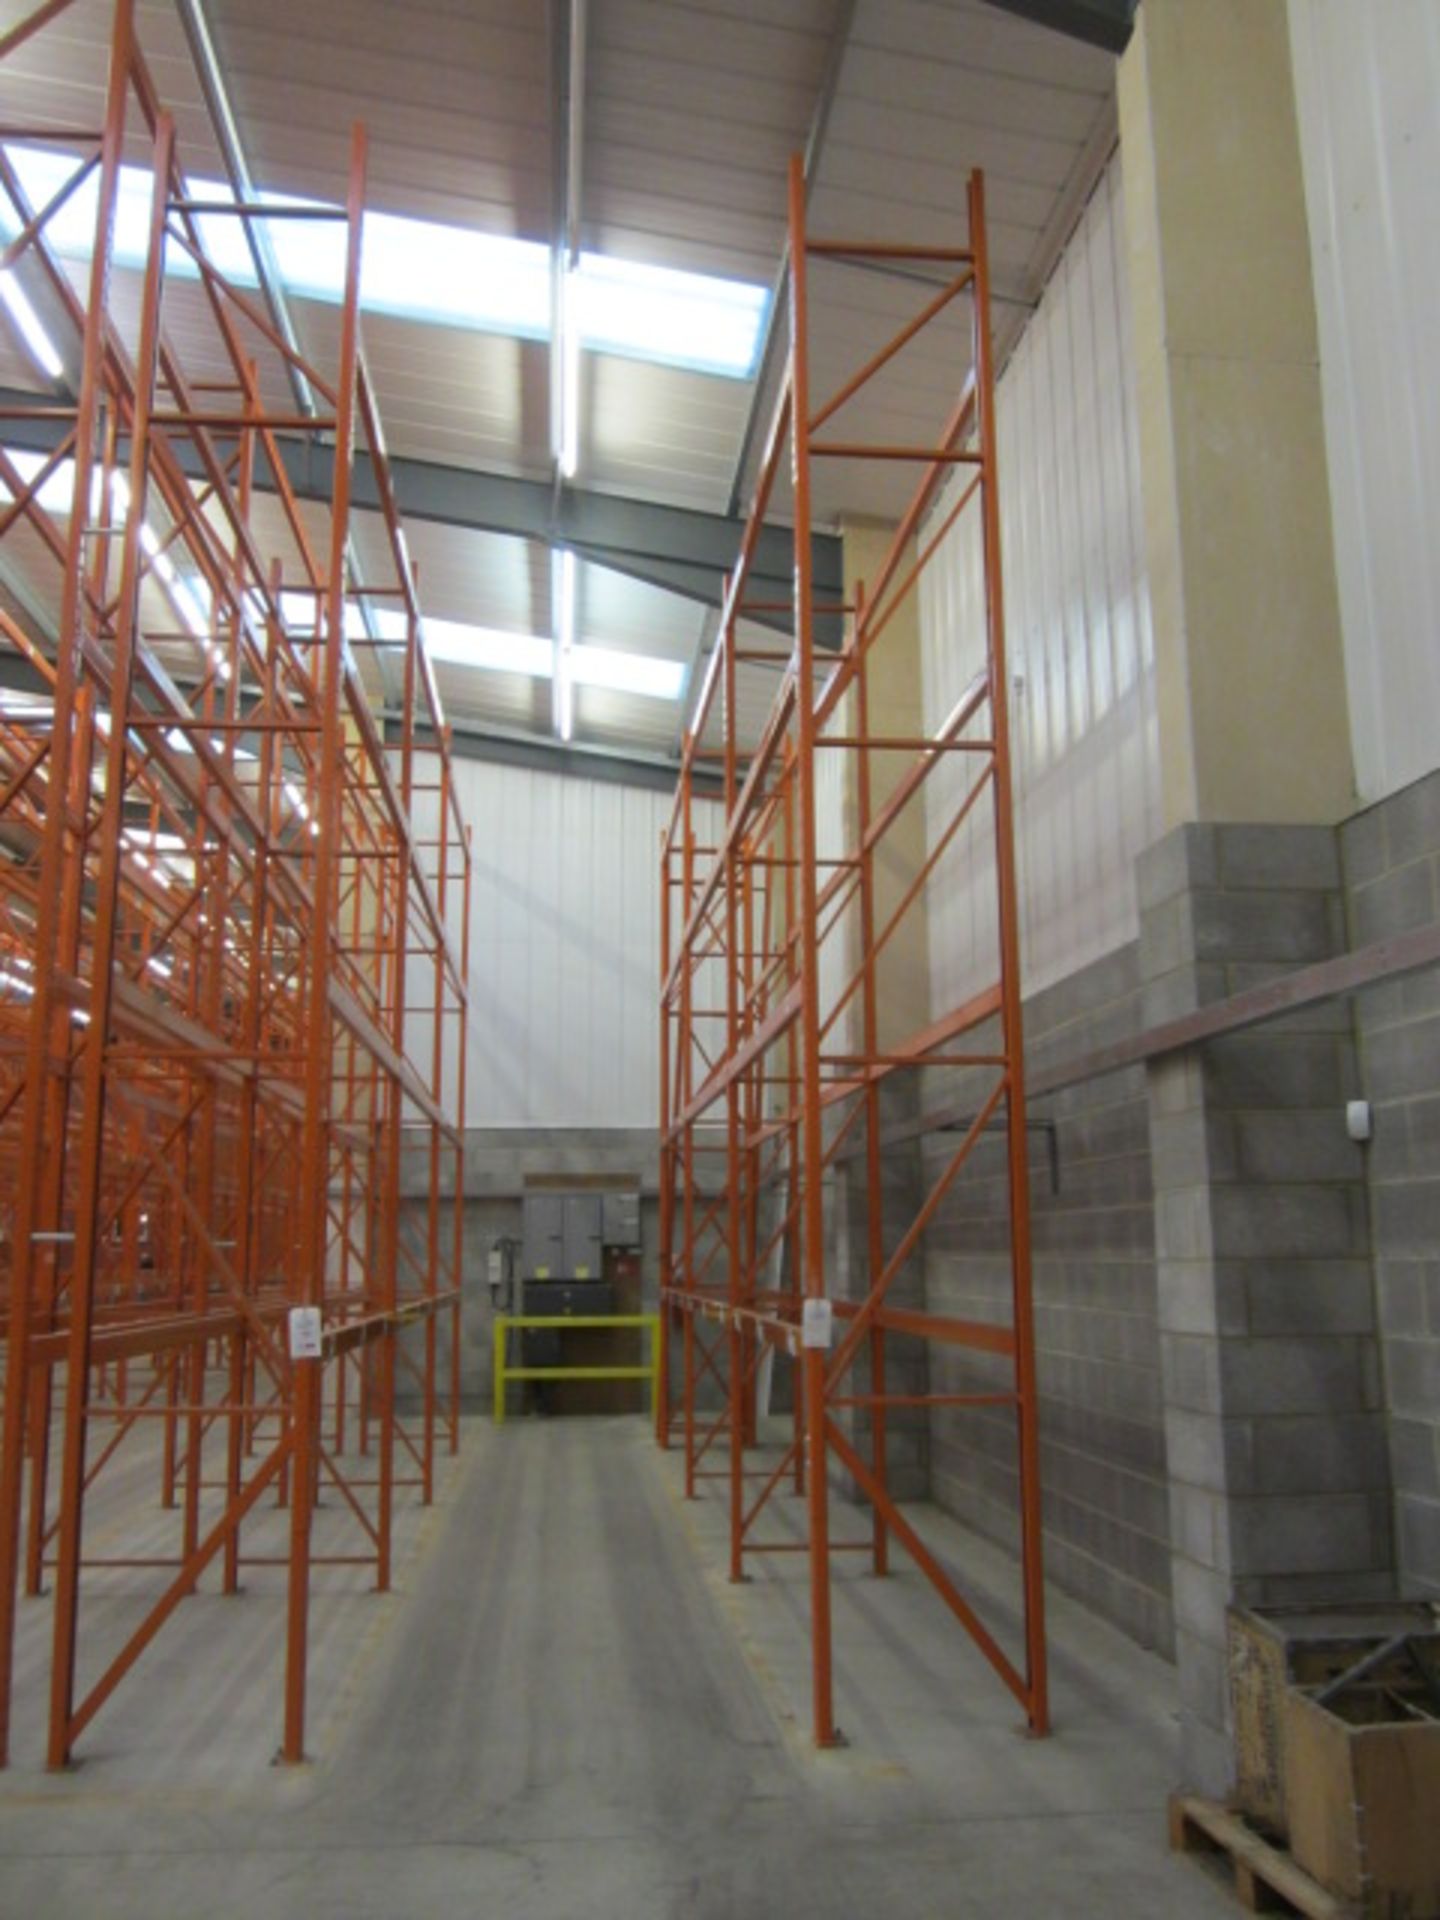 6 bays of Redirack boltless pallet racking, approx. sizes depth 800mm x width 2,750mm x Height